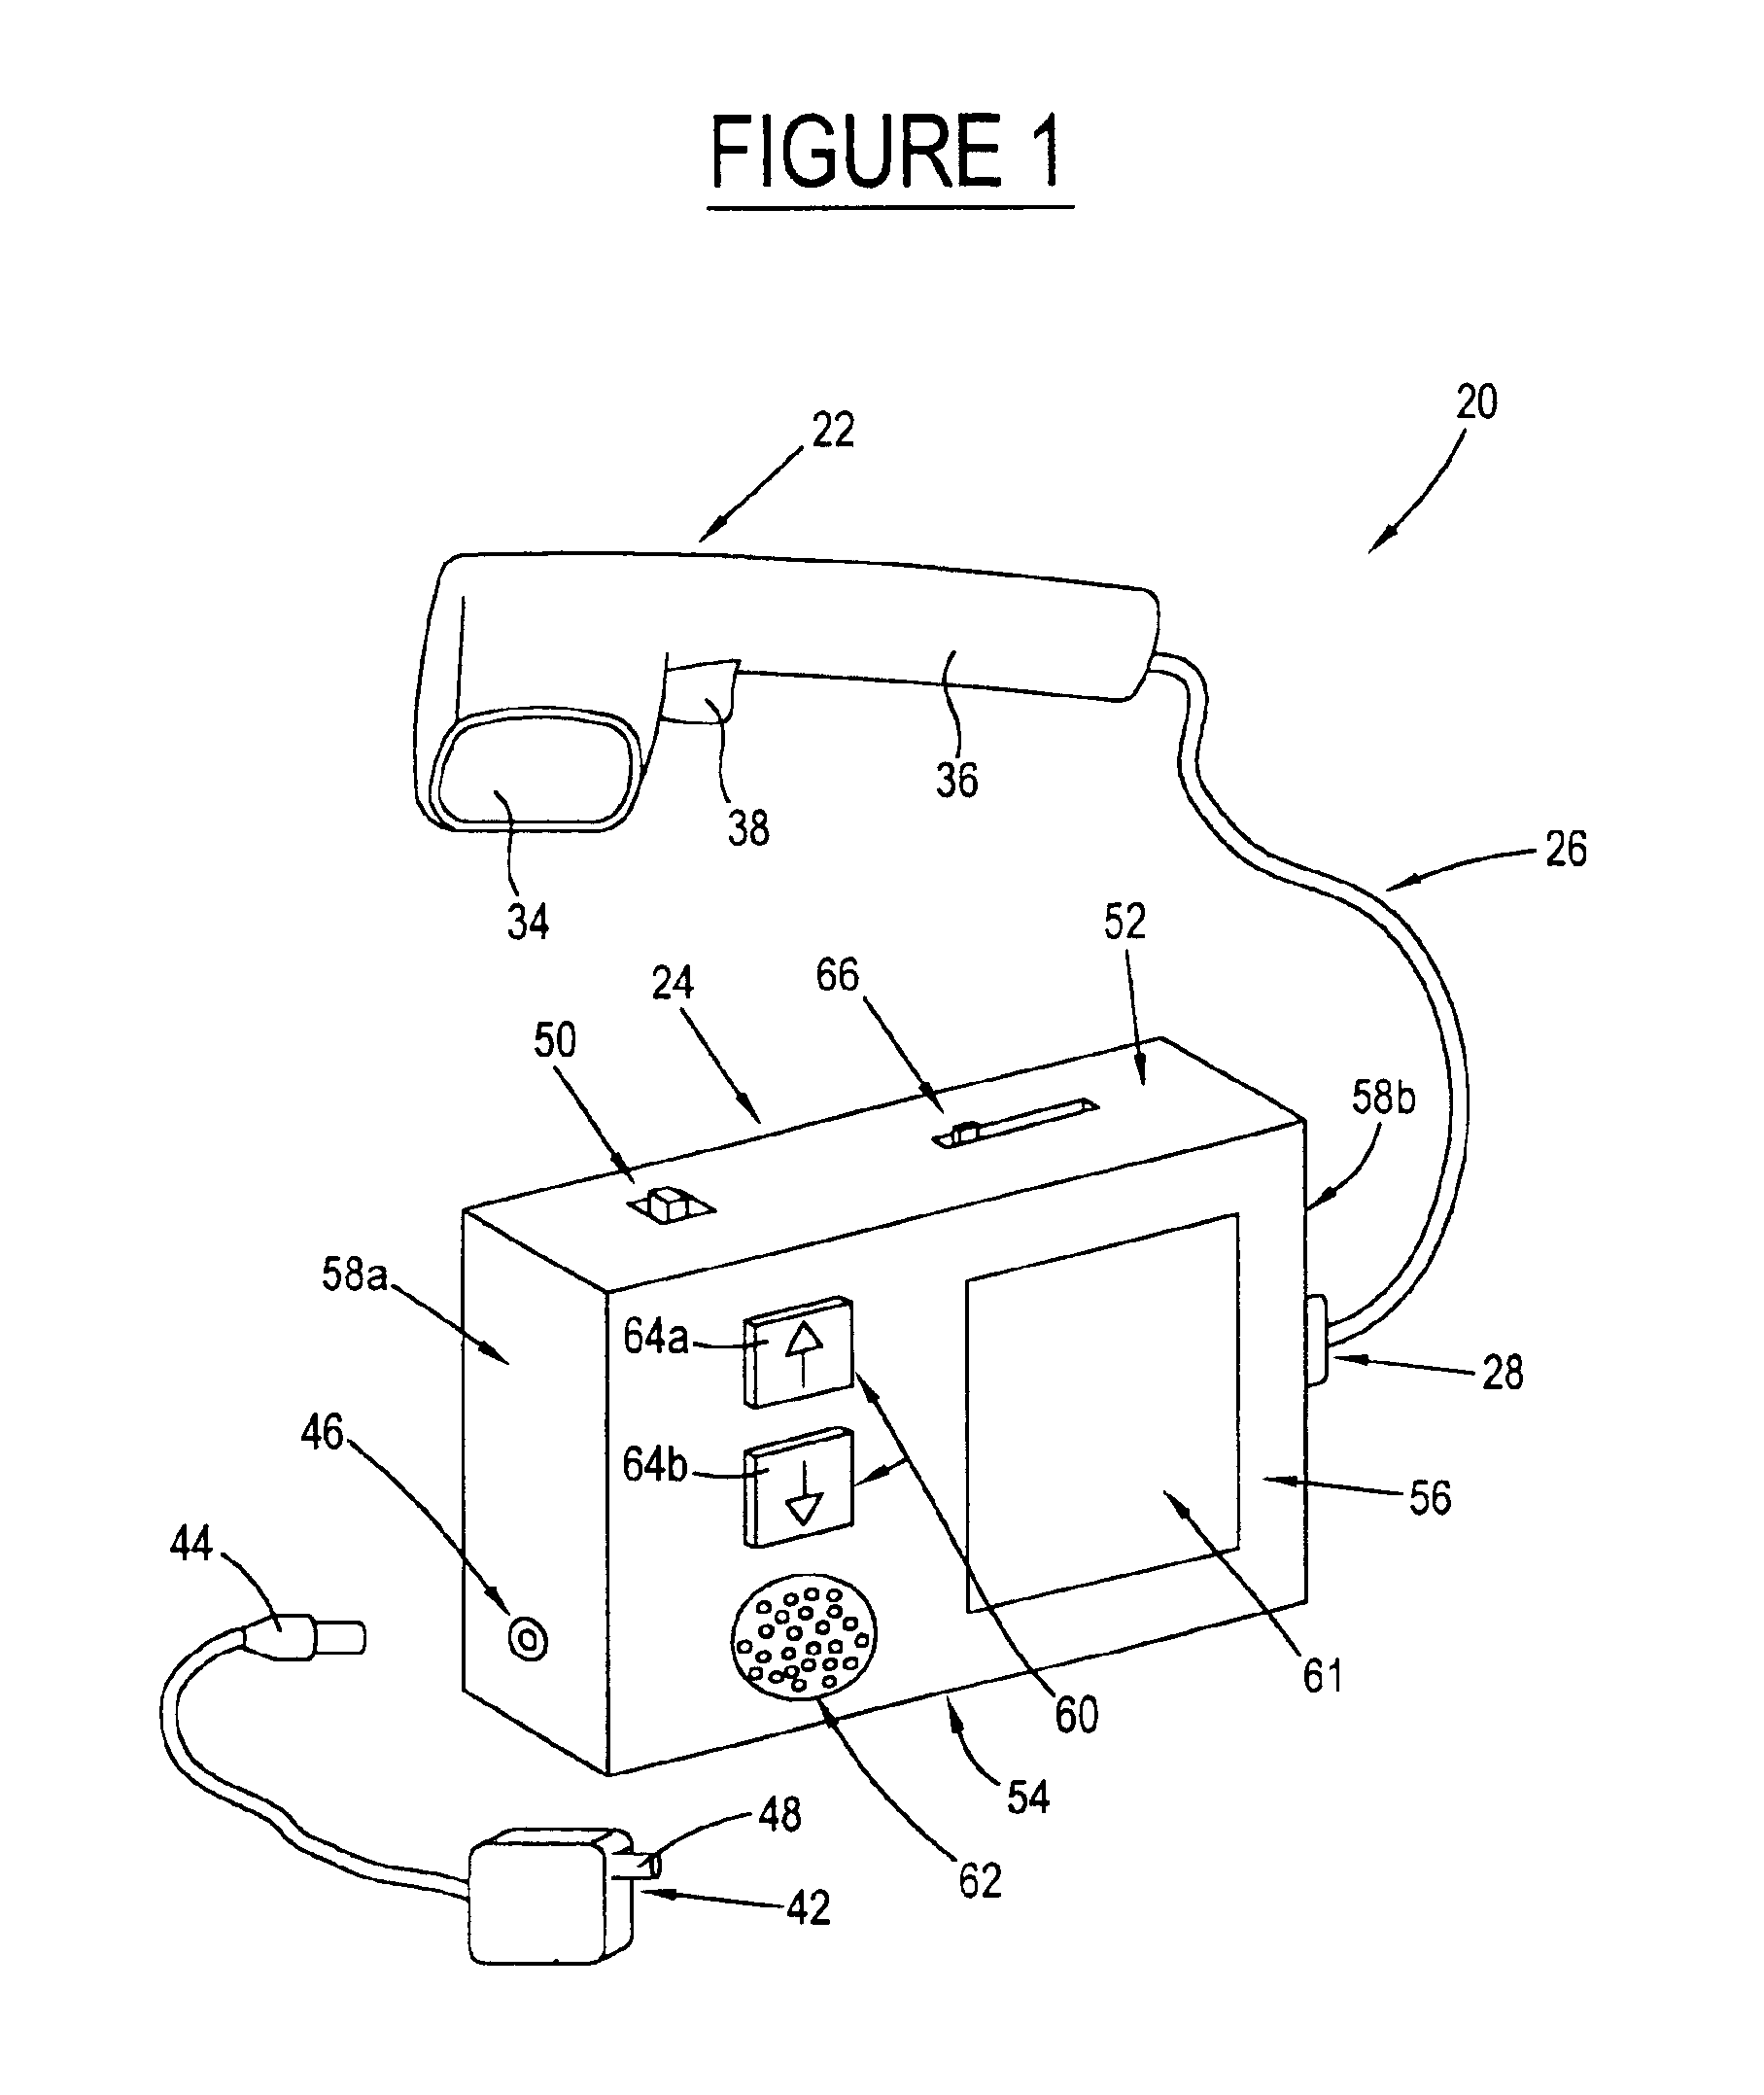 Apparatus and method for information challenged persons to determine information regarding pharmaceutical container labels